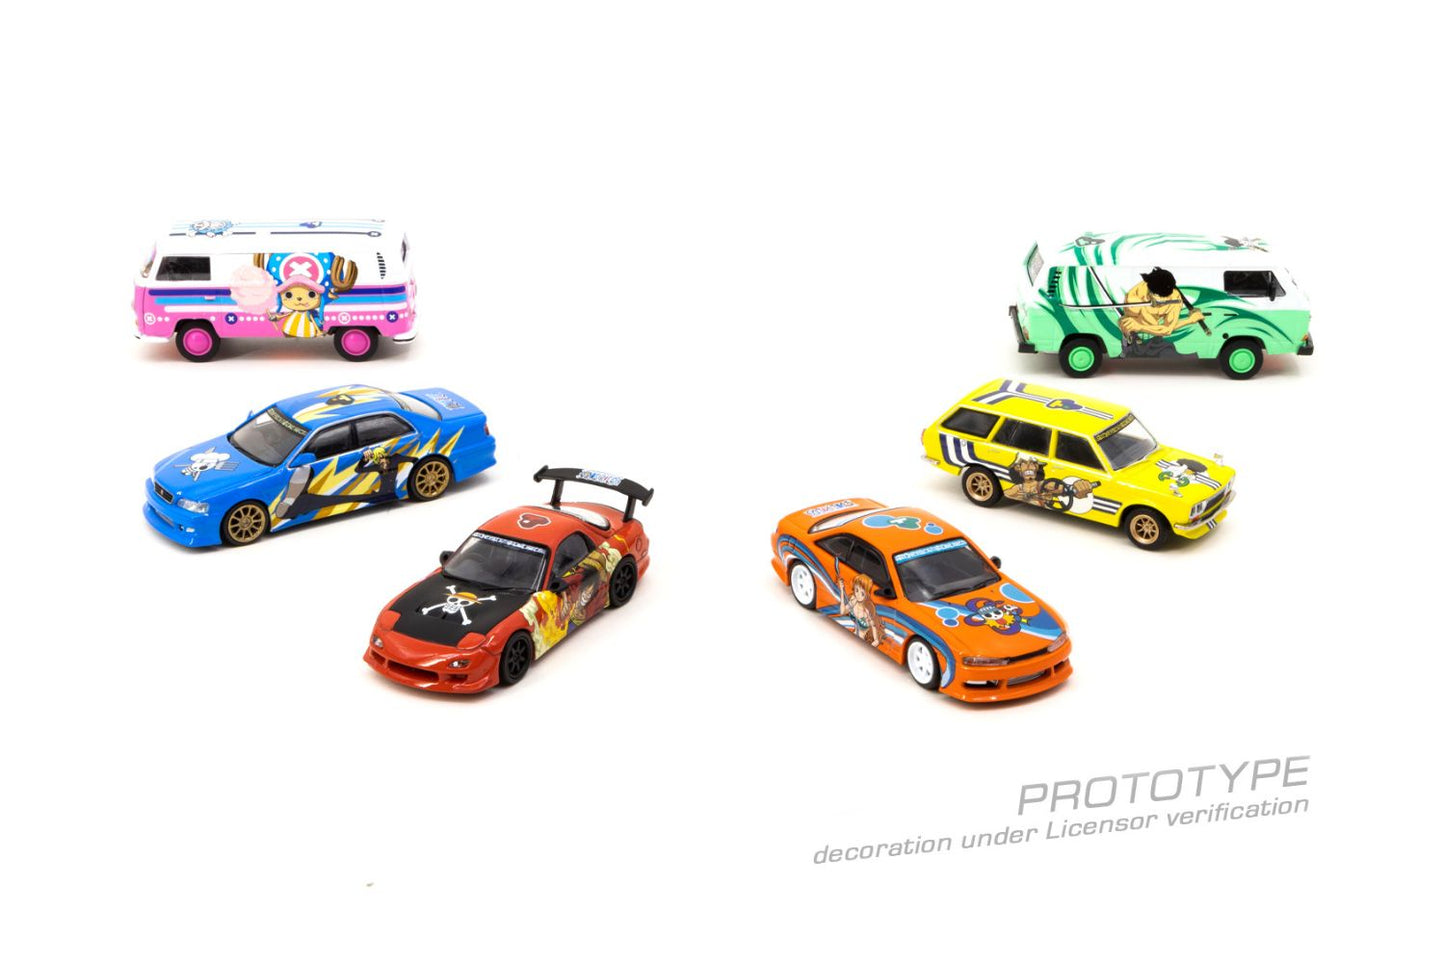 Tarmac Works x One Piece Model Car Collection Volume 1 Boxset